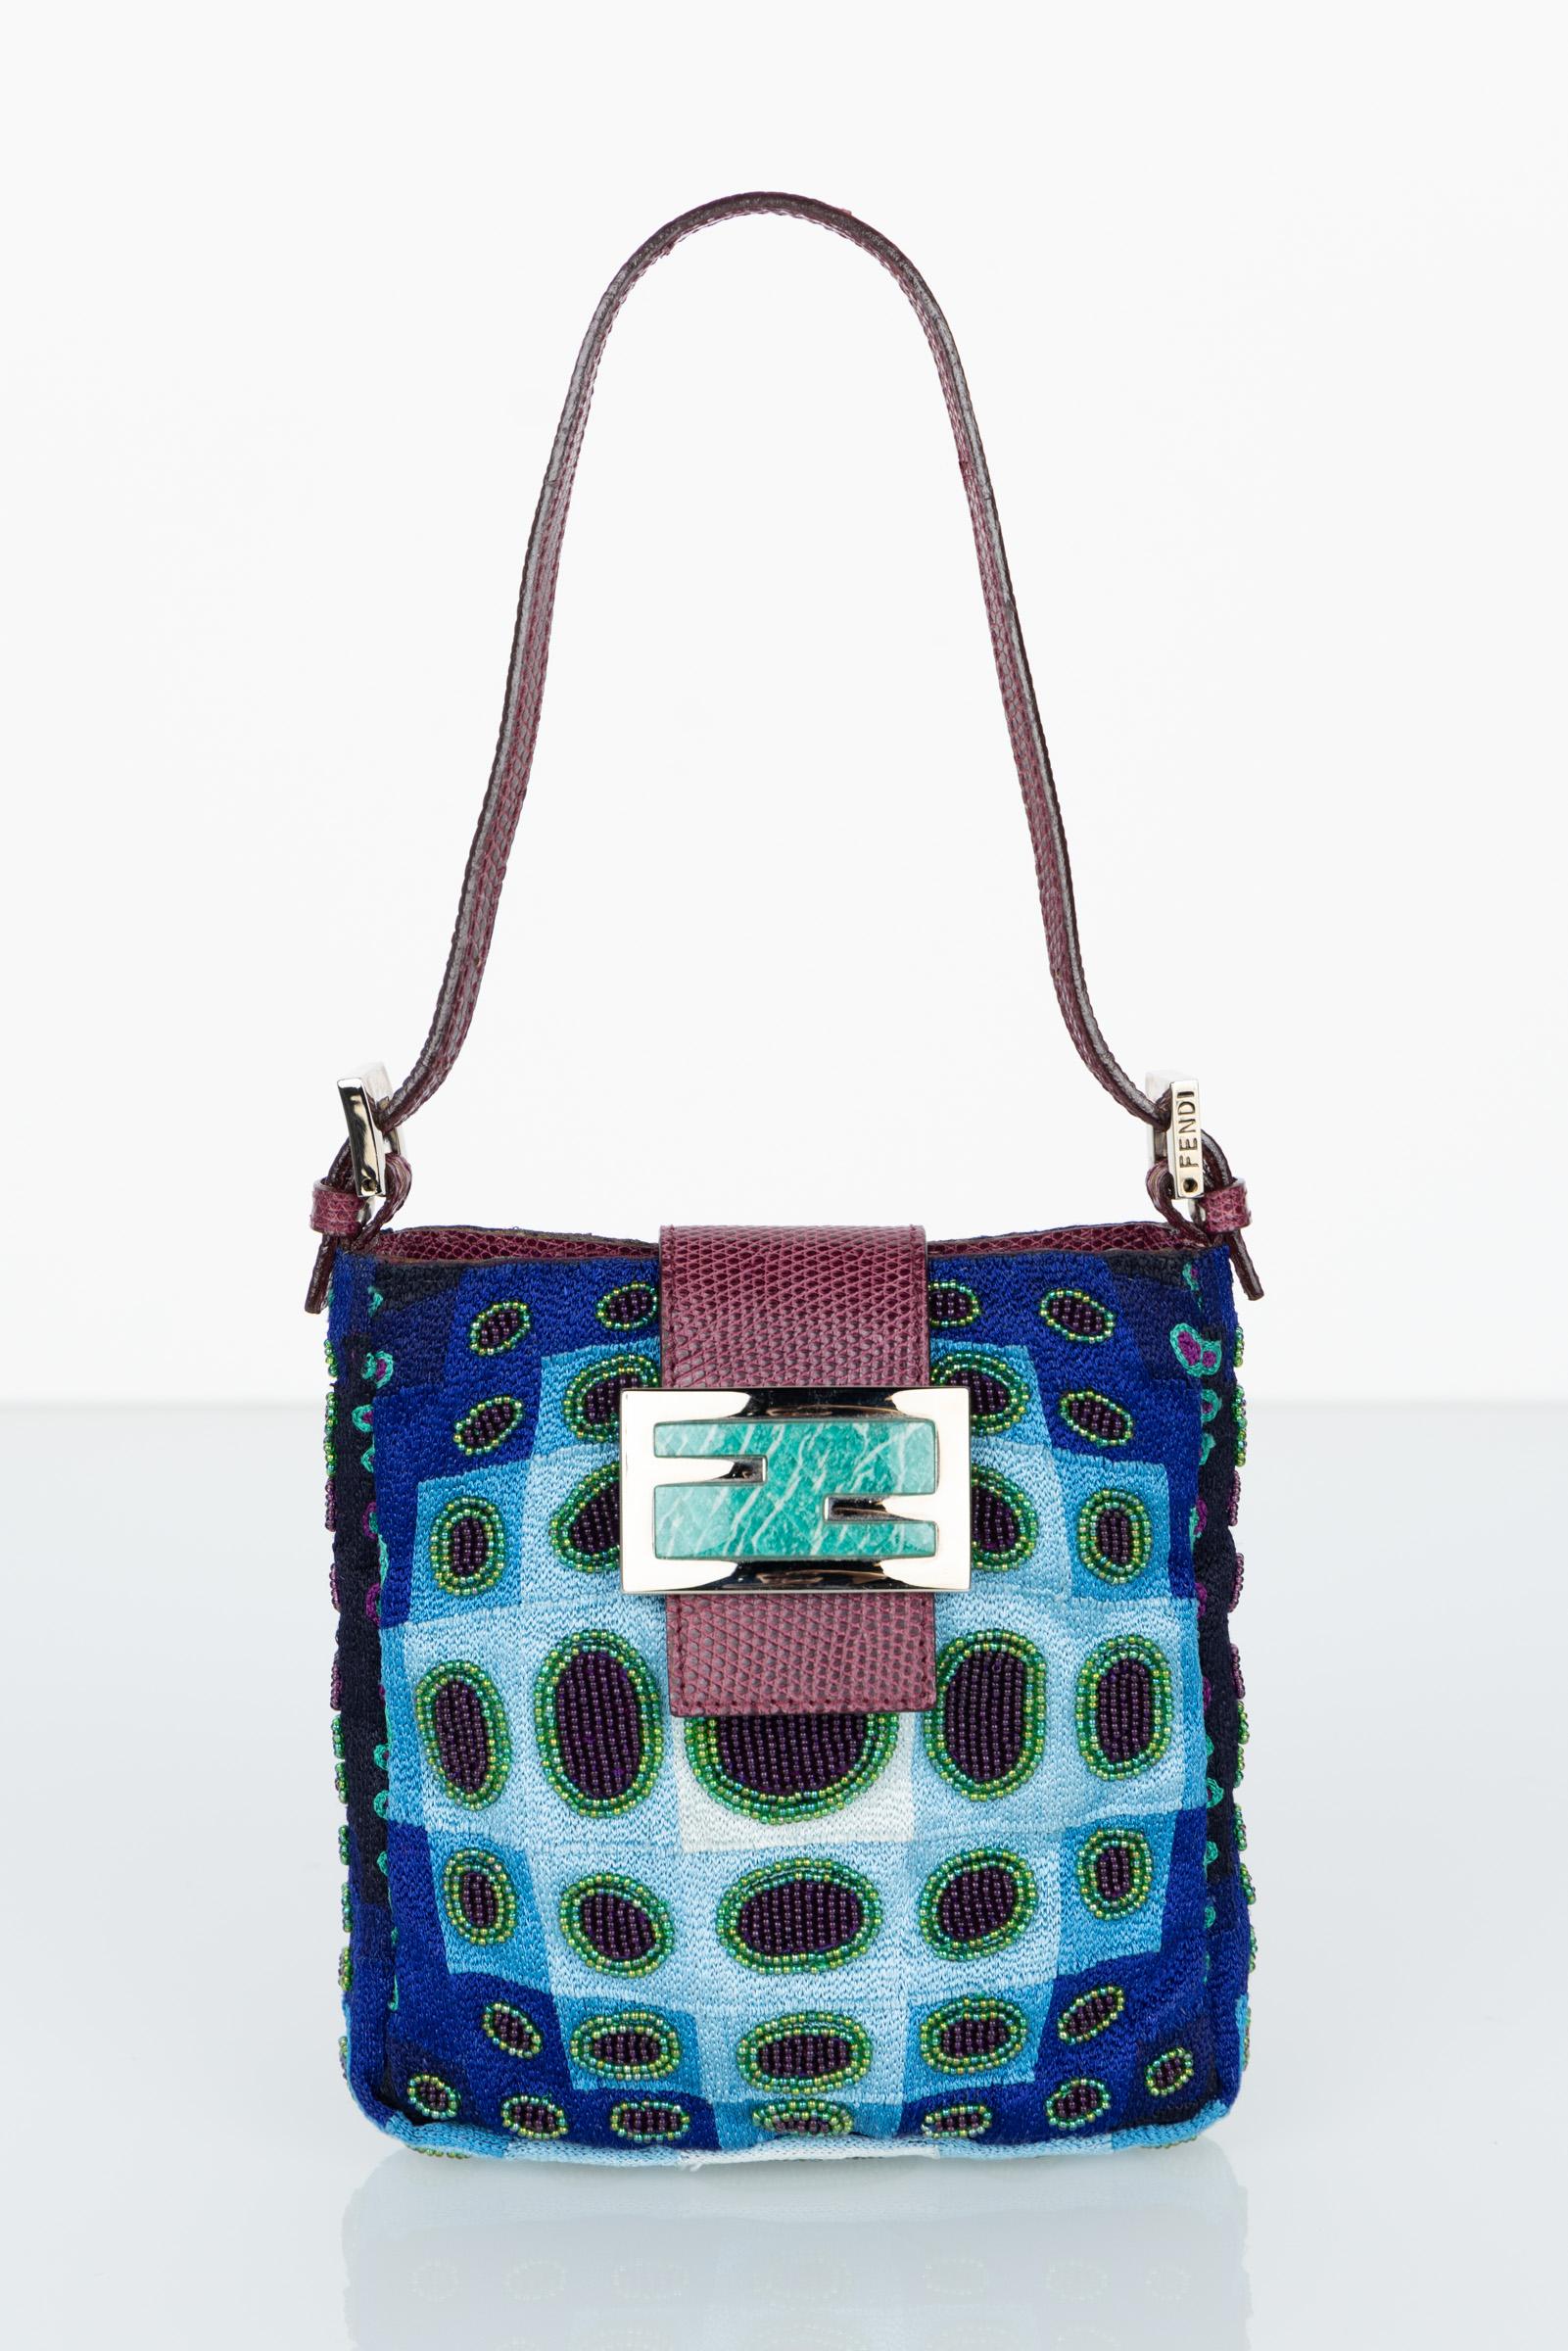 A unique and exquisite vintage Fendi mini bag with a distinctive design and luxurious features. The combination of blue-green turquoise embroidered silk tapestry with hand-beaded circles and ovals, along with burgundy lizard trim handles, creates a